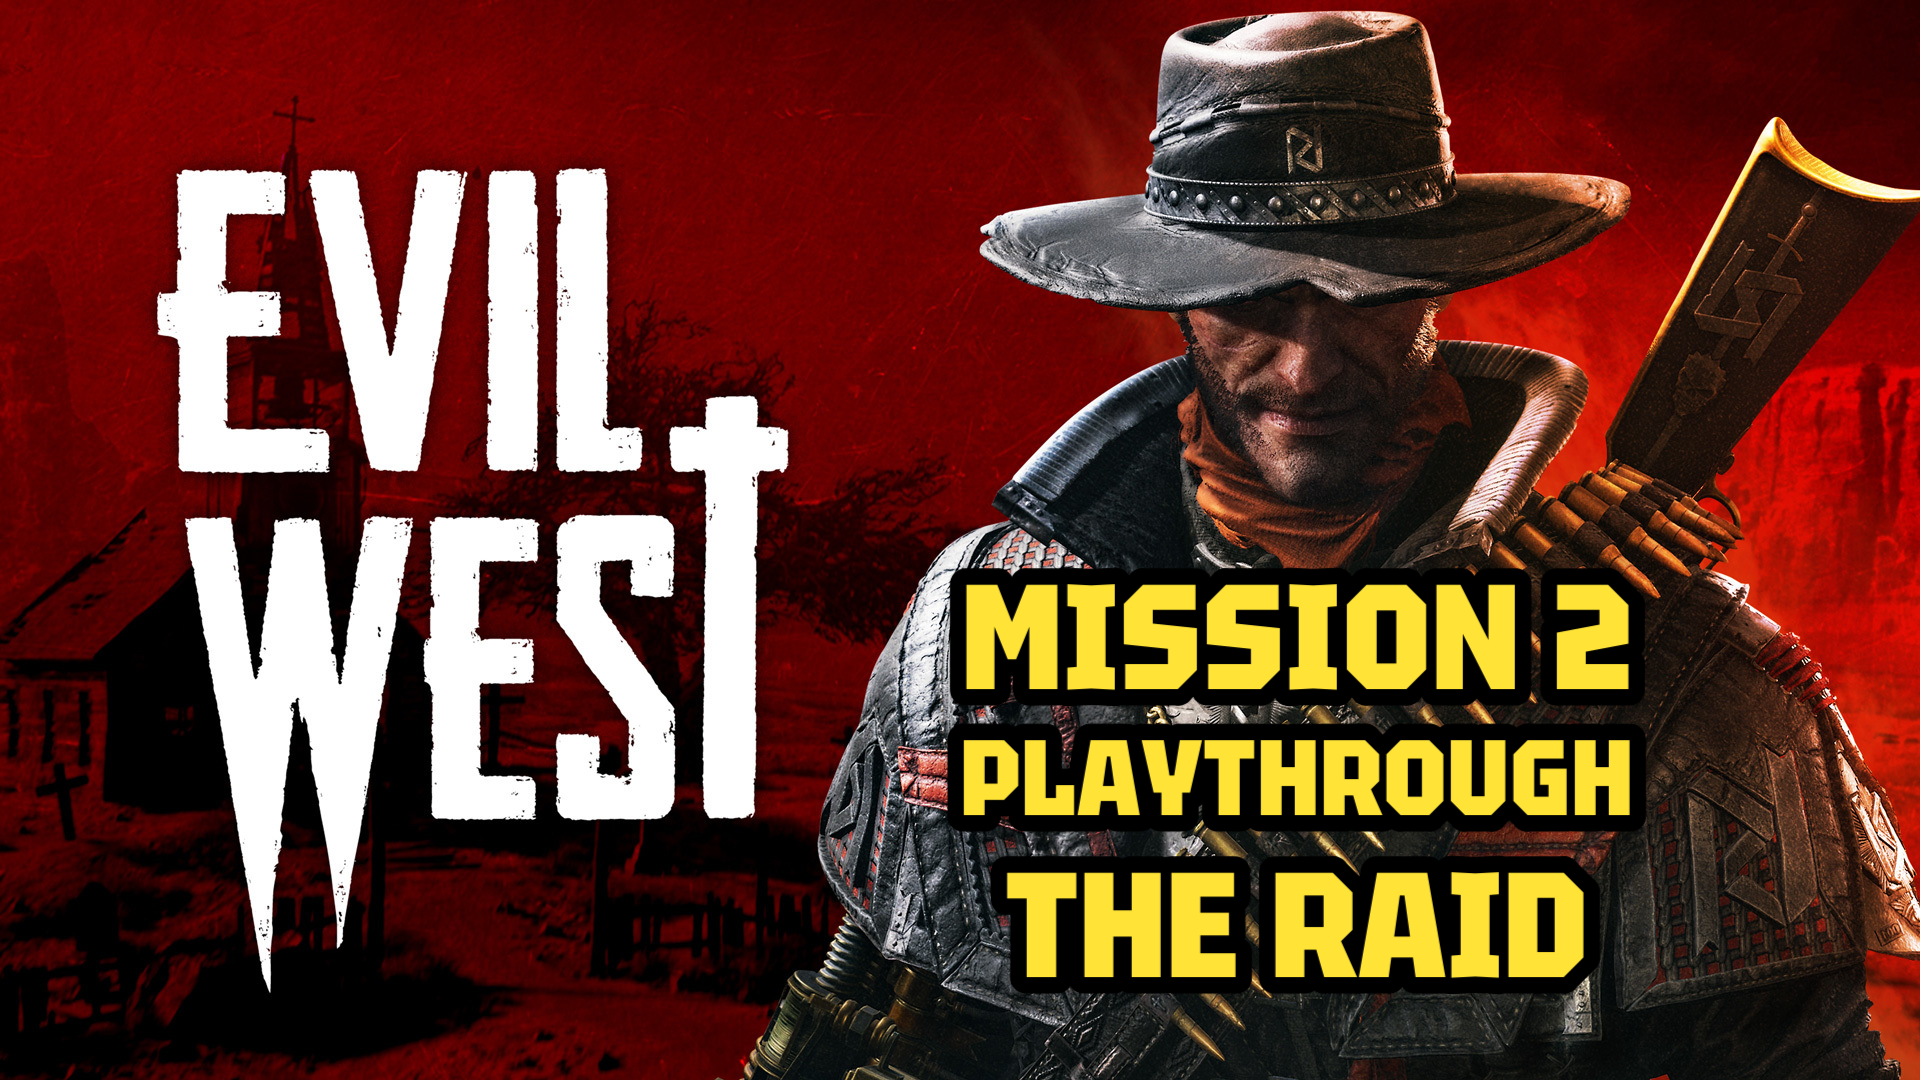 EVIL WEST | MISSION 2 THE RAID | PLAYTHROUGH #evilwest #gameplay #wildwest